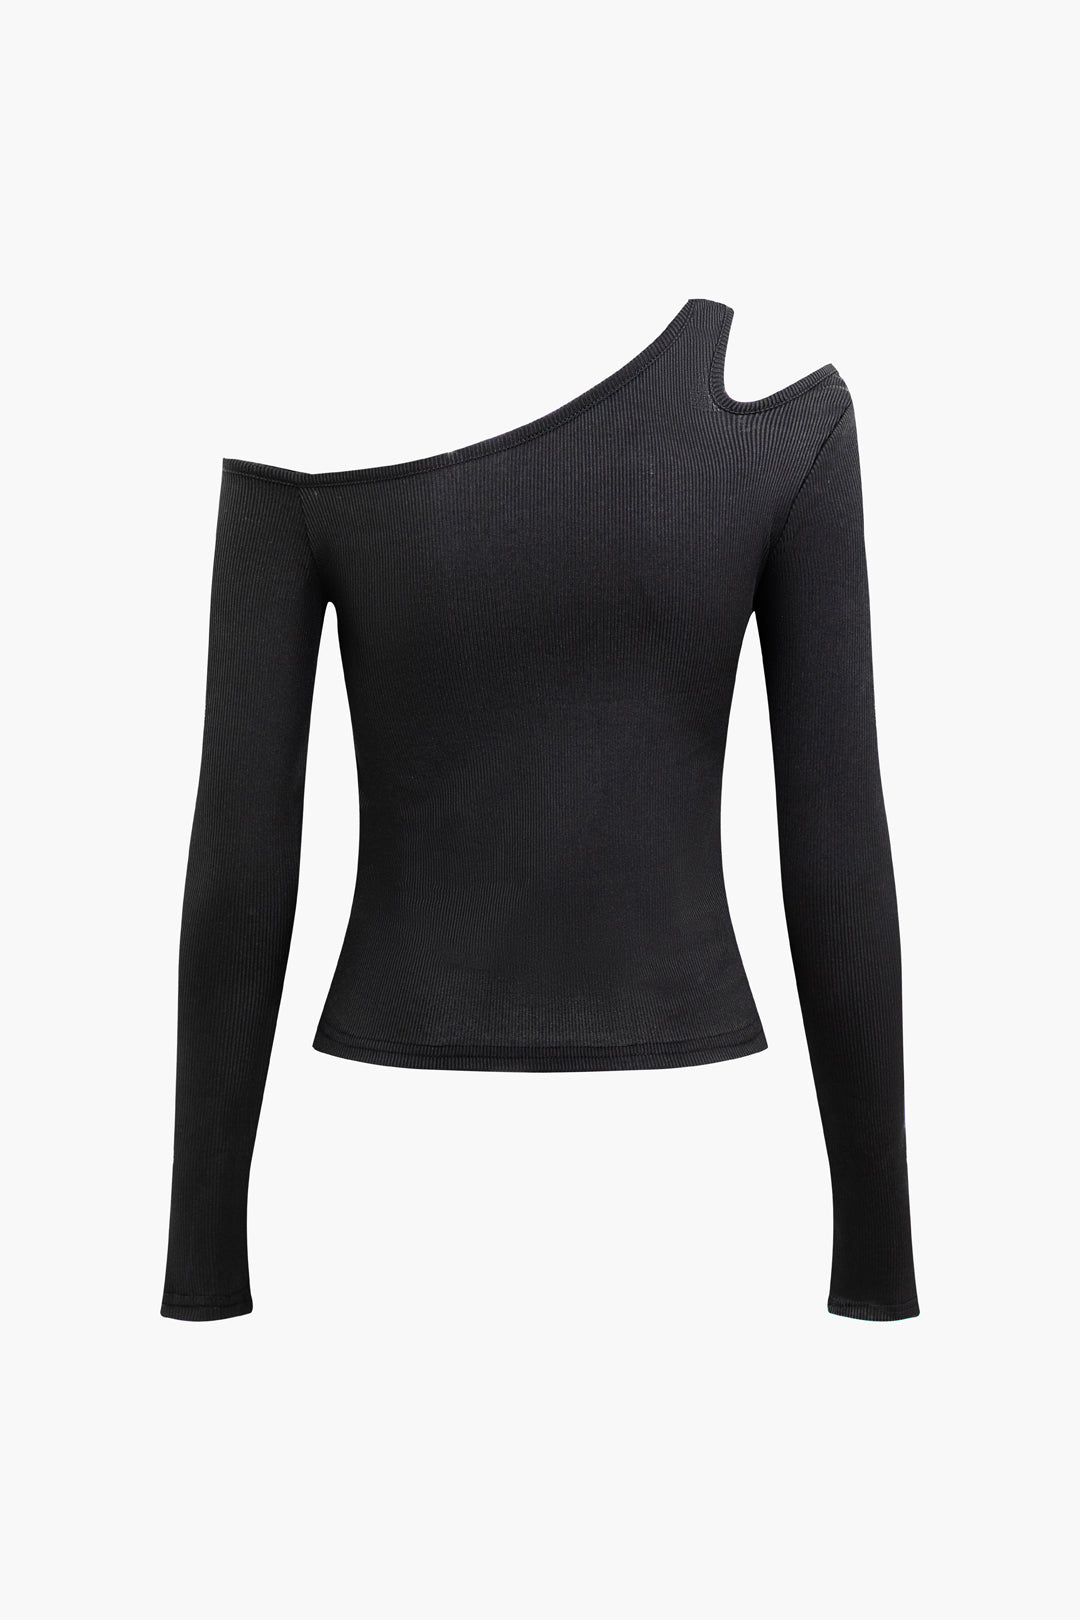 Solid Asymmetrical Cut Out Long Sleeve Top